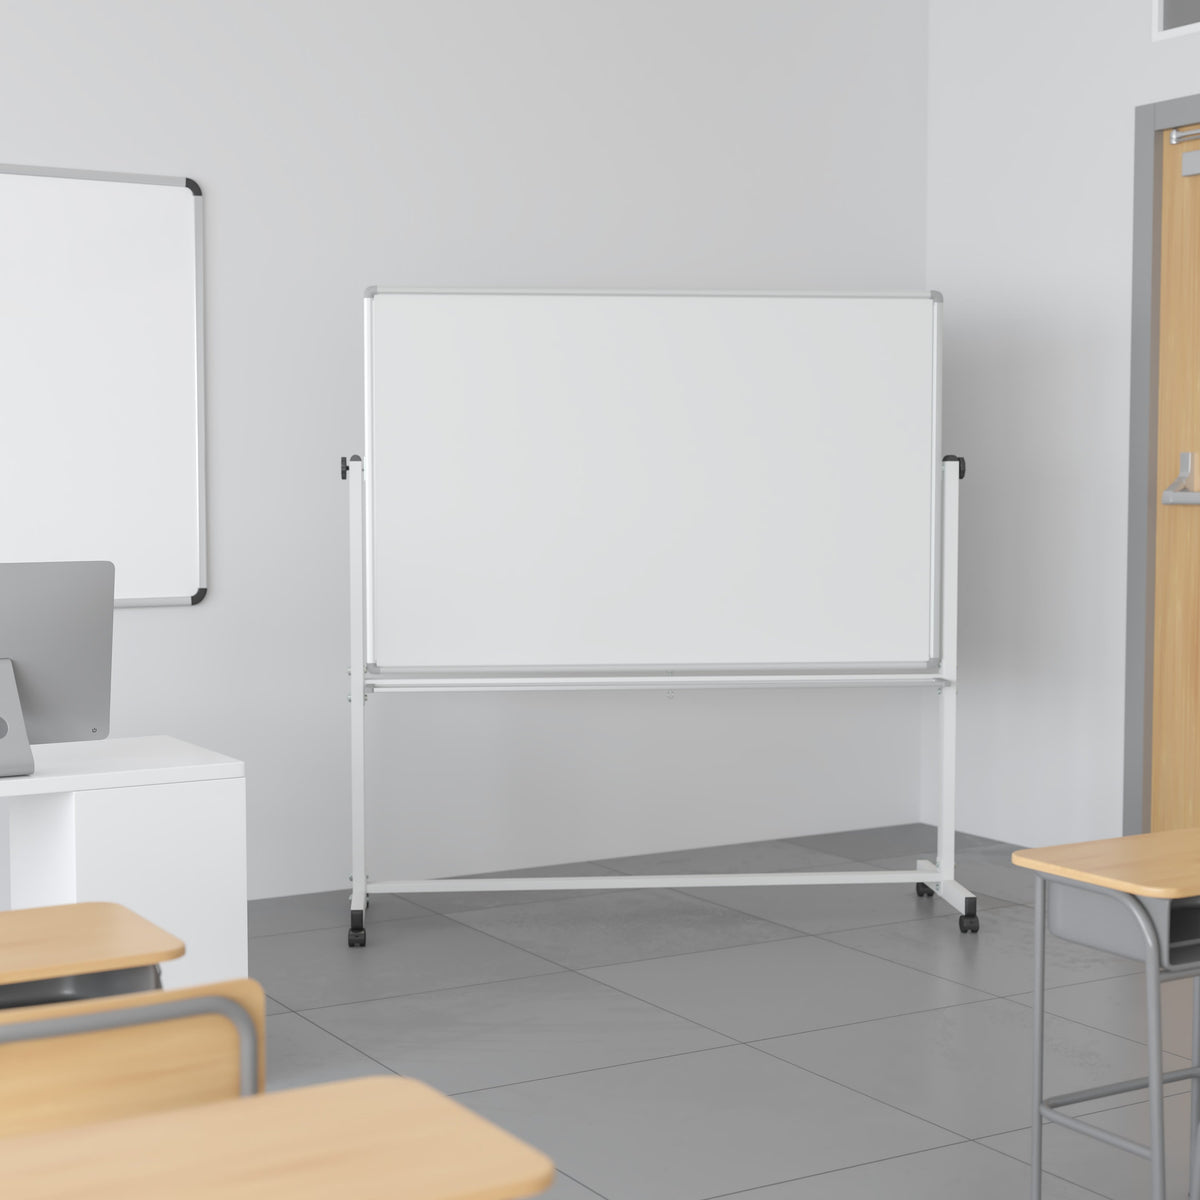 64.25"W x 64.75"H |#| 64.25"W x 64.75"H Double-Sided Mobile White Board with Shelf - Flip Over Board